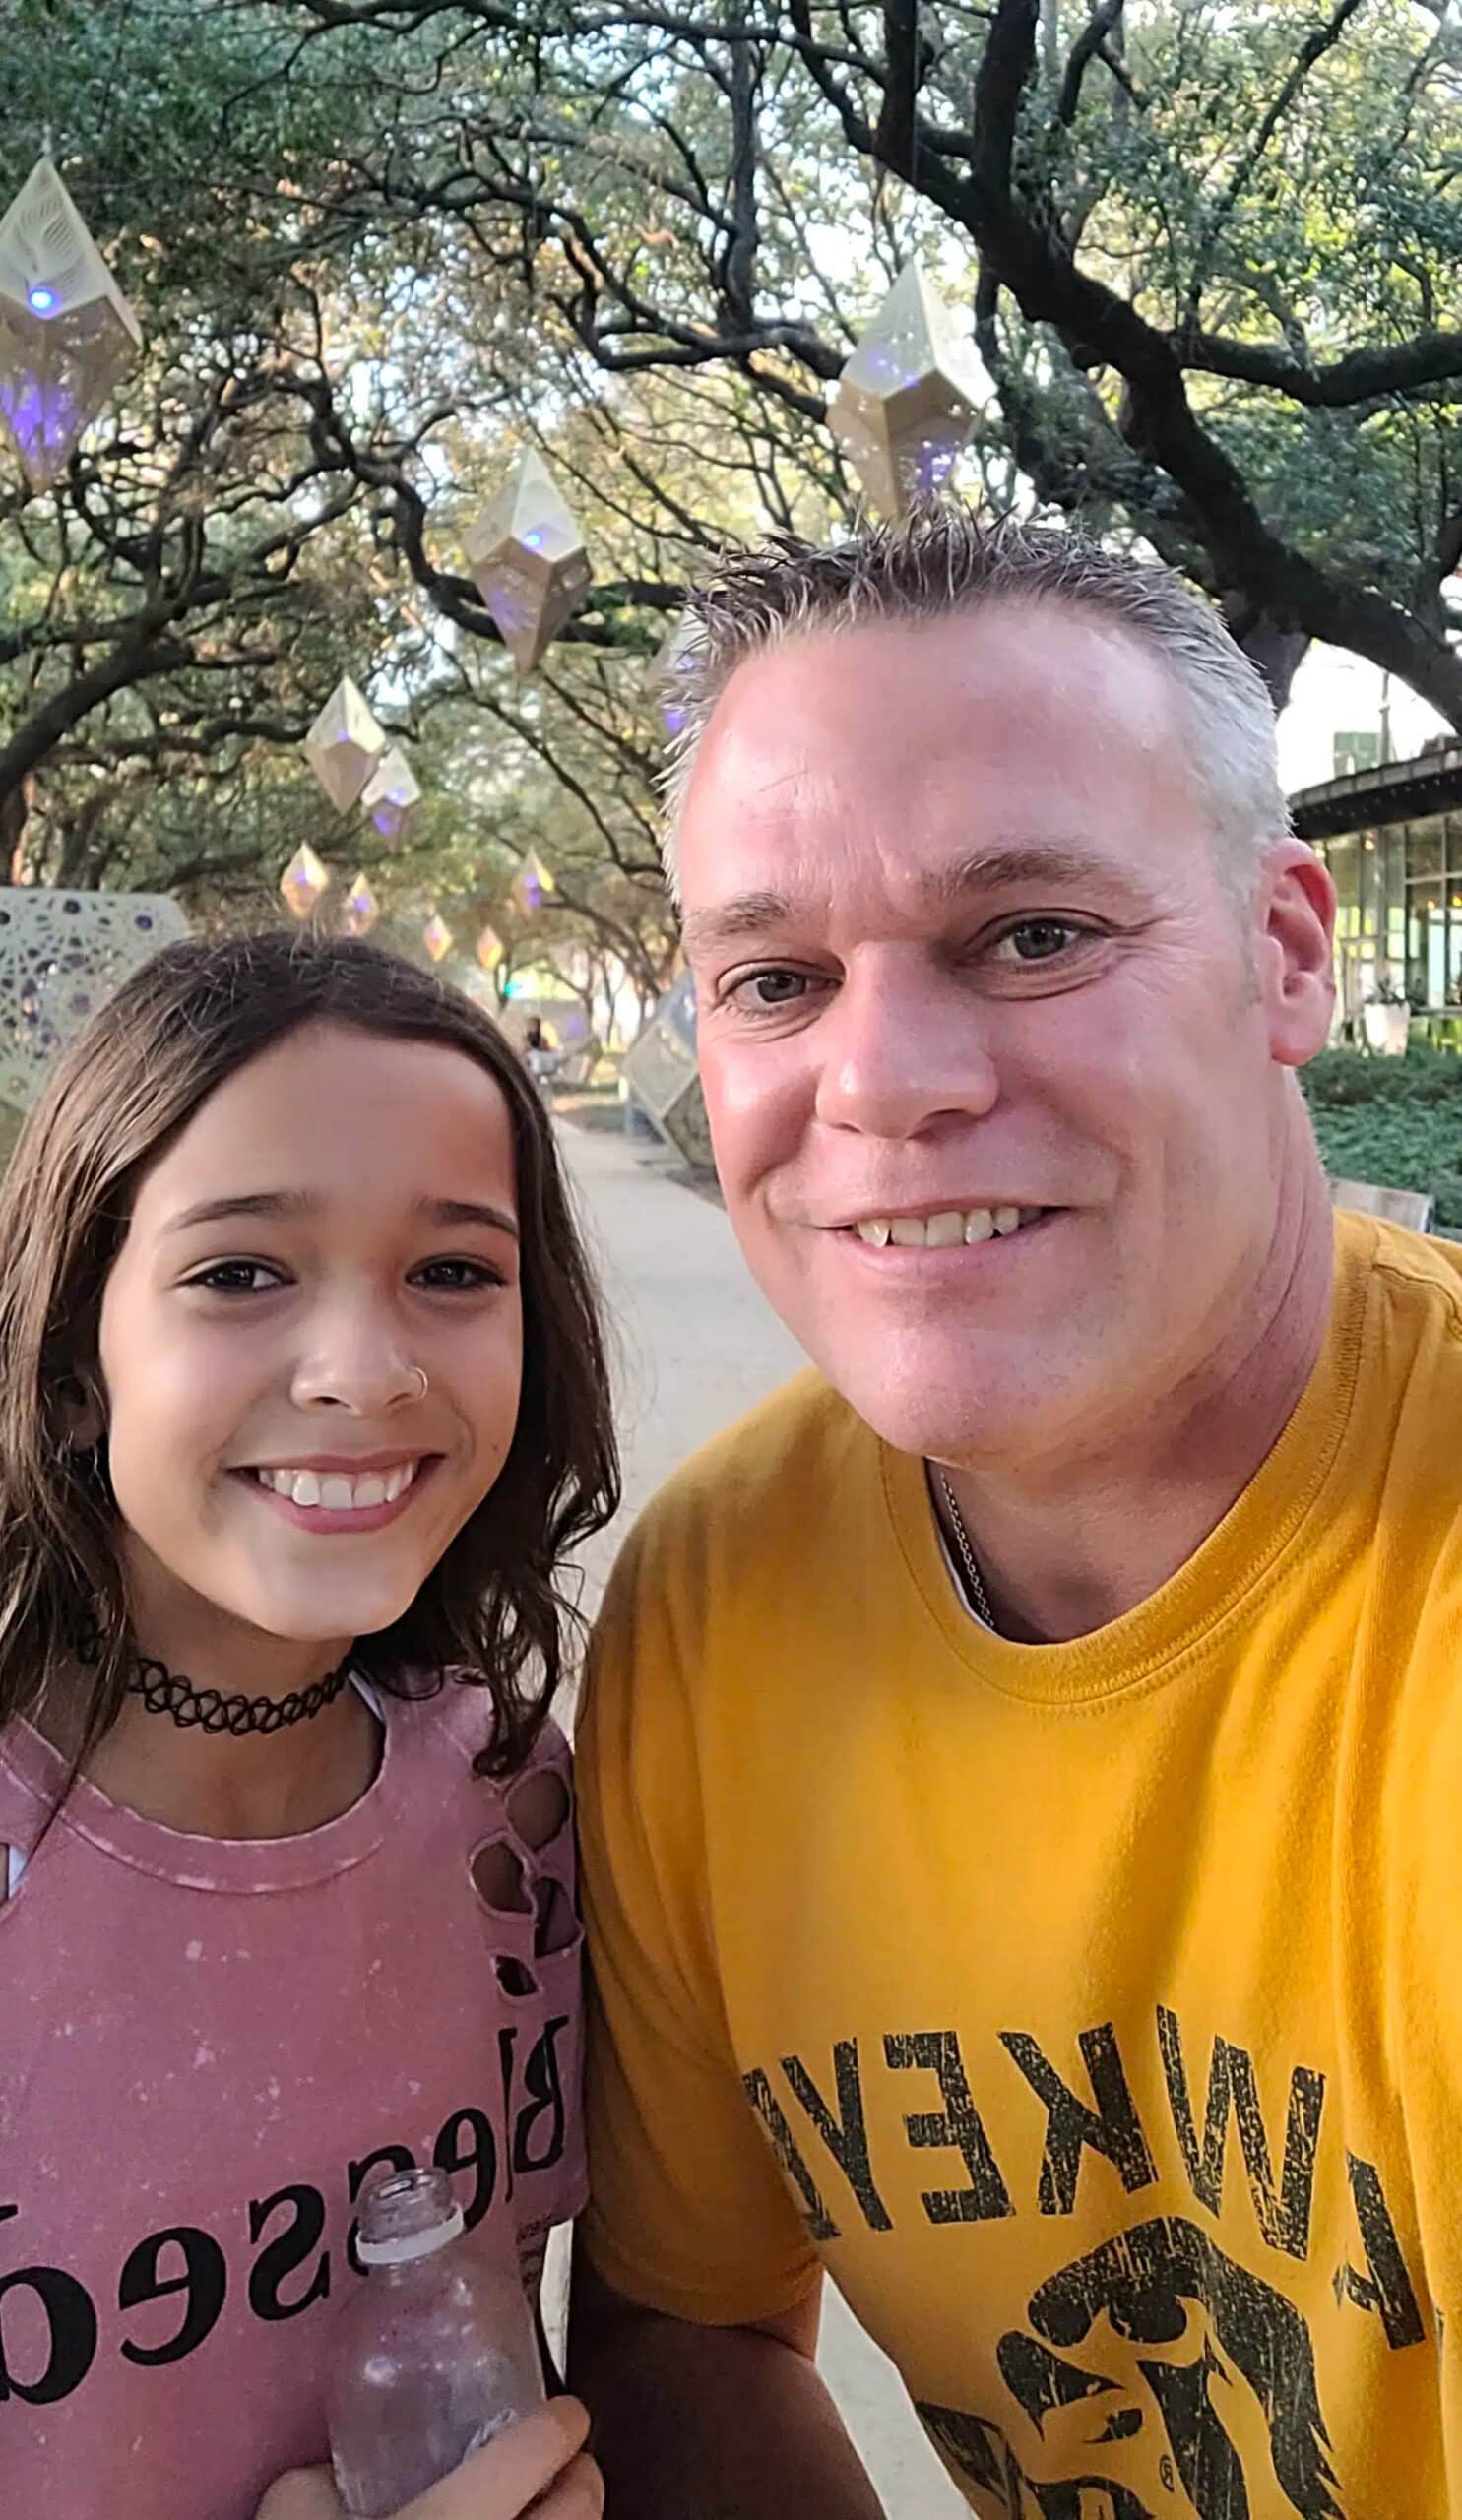 I had a daddy/daughter date in late December, 2021, at Hilton Las Americas with my daughter, Kat. We had a room with a park view. We spent the day at the park and the skating rink. Then, dinner at Biggio’s before a rooftop evening swim. Good memories made with my daughter and great views for pics! — Andrew Papke